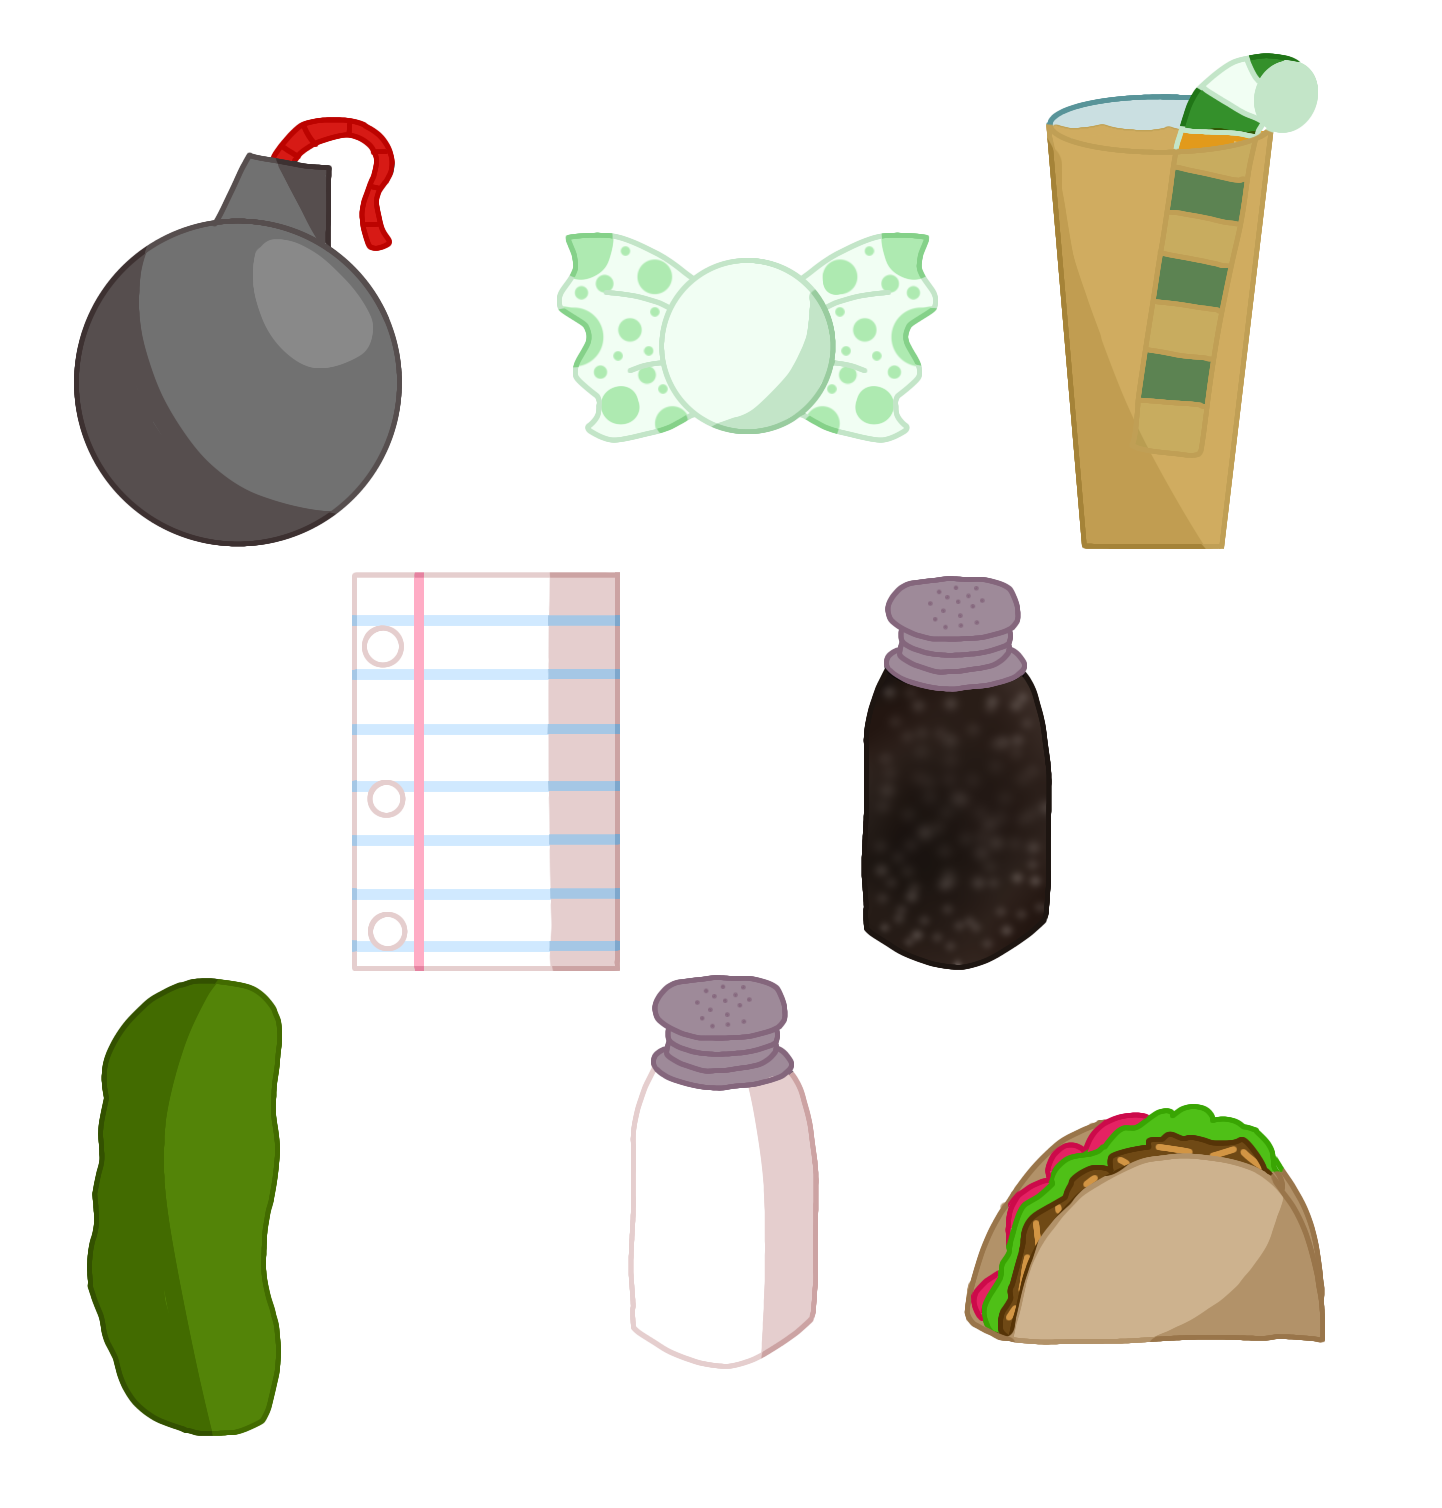 BFDI assets I made in my style by CREATIVEKID2030 on DeviantArt